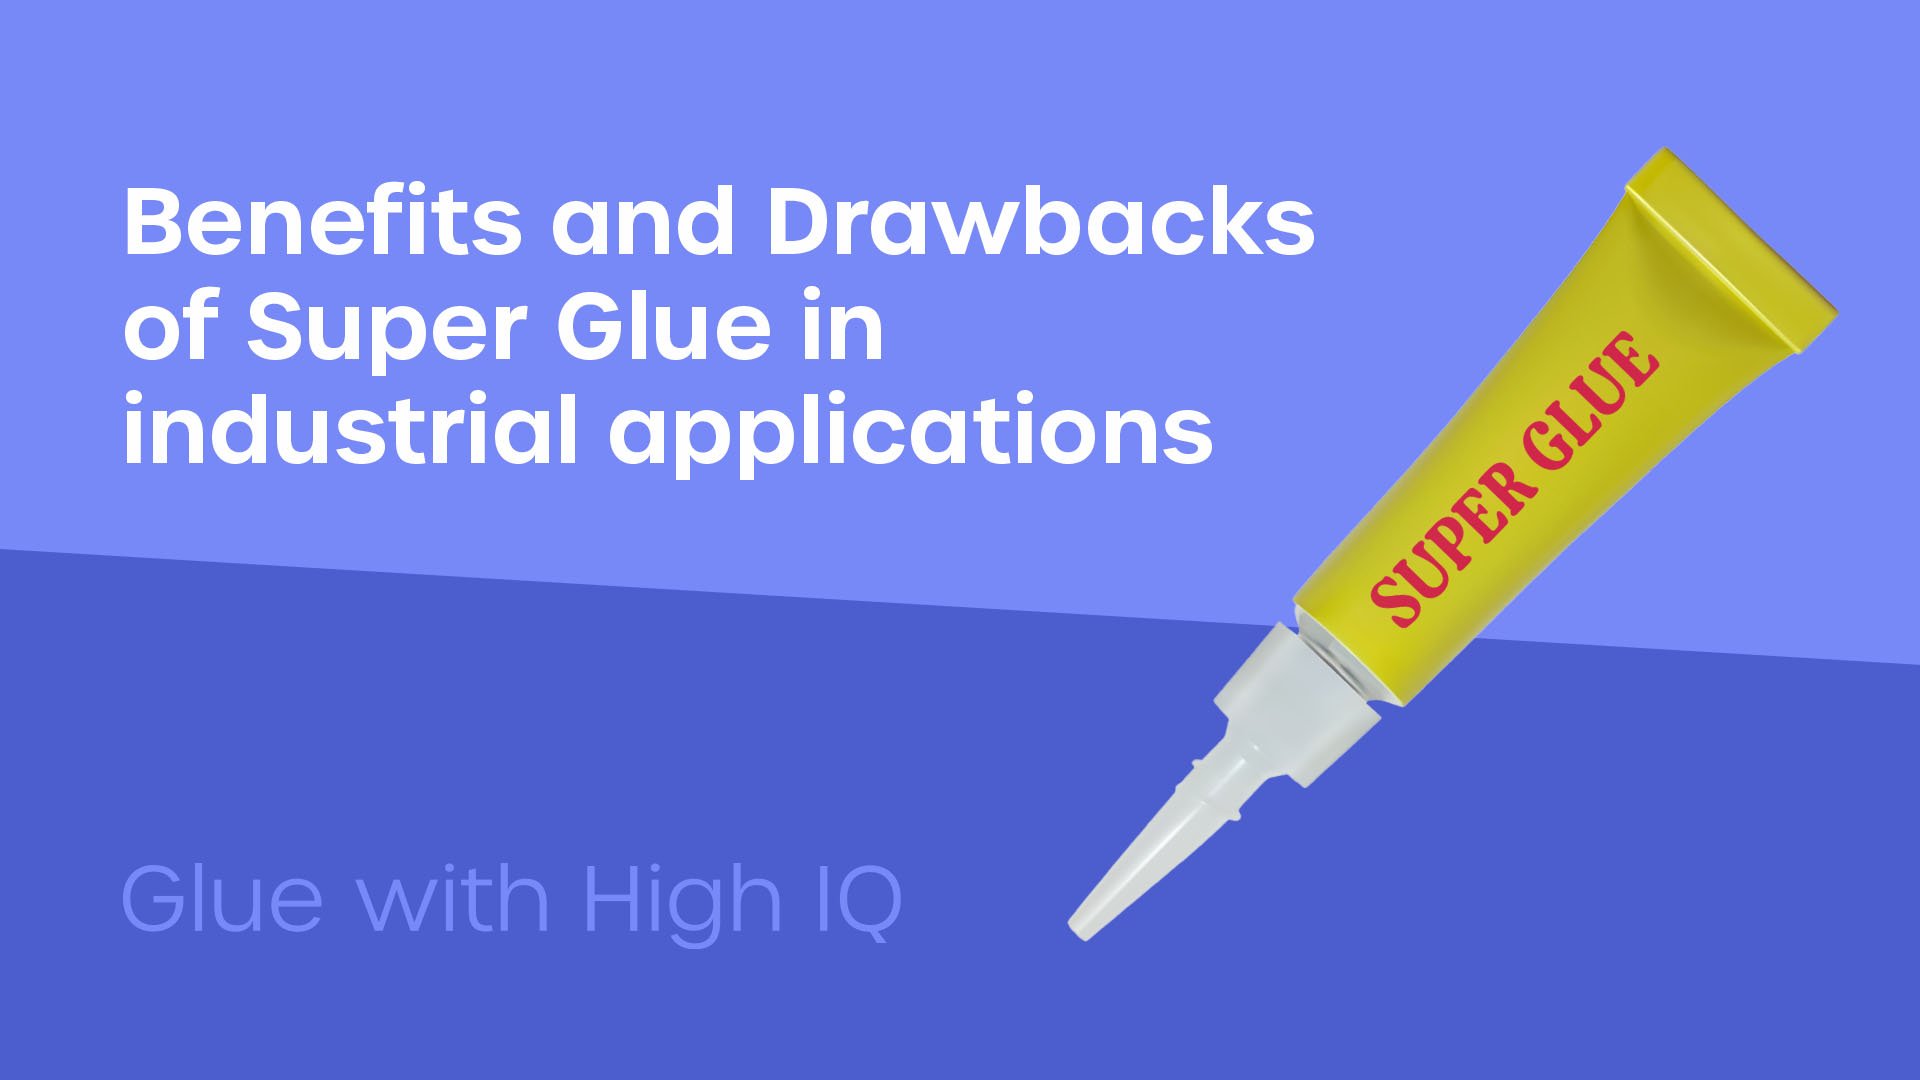 Using Super Glue in industrial applications